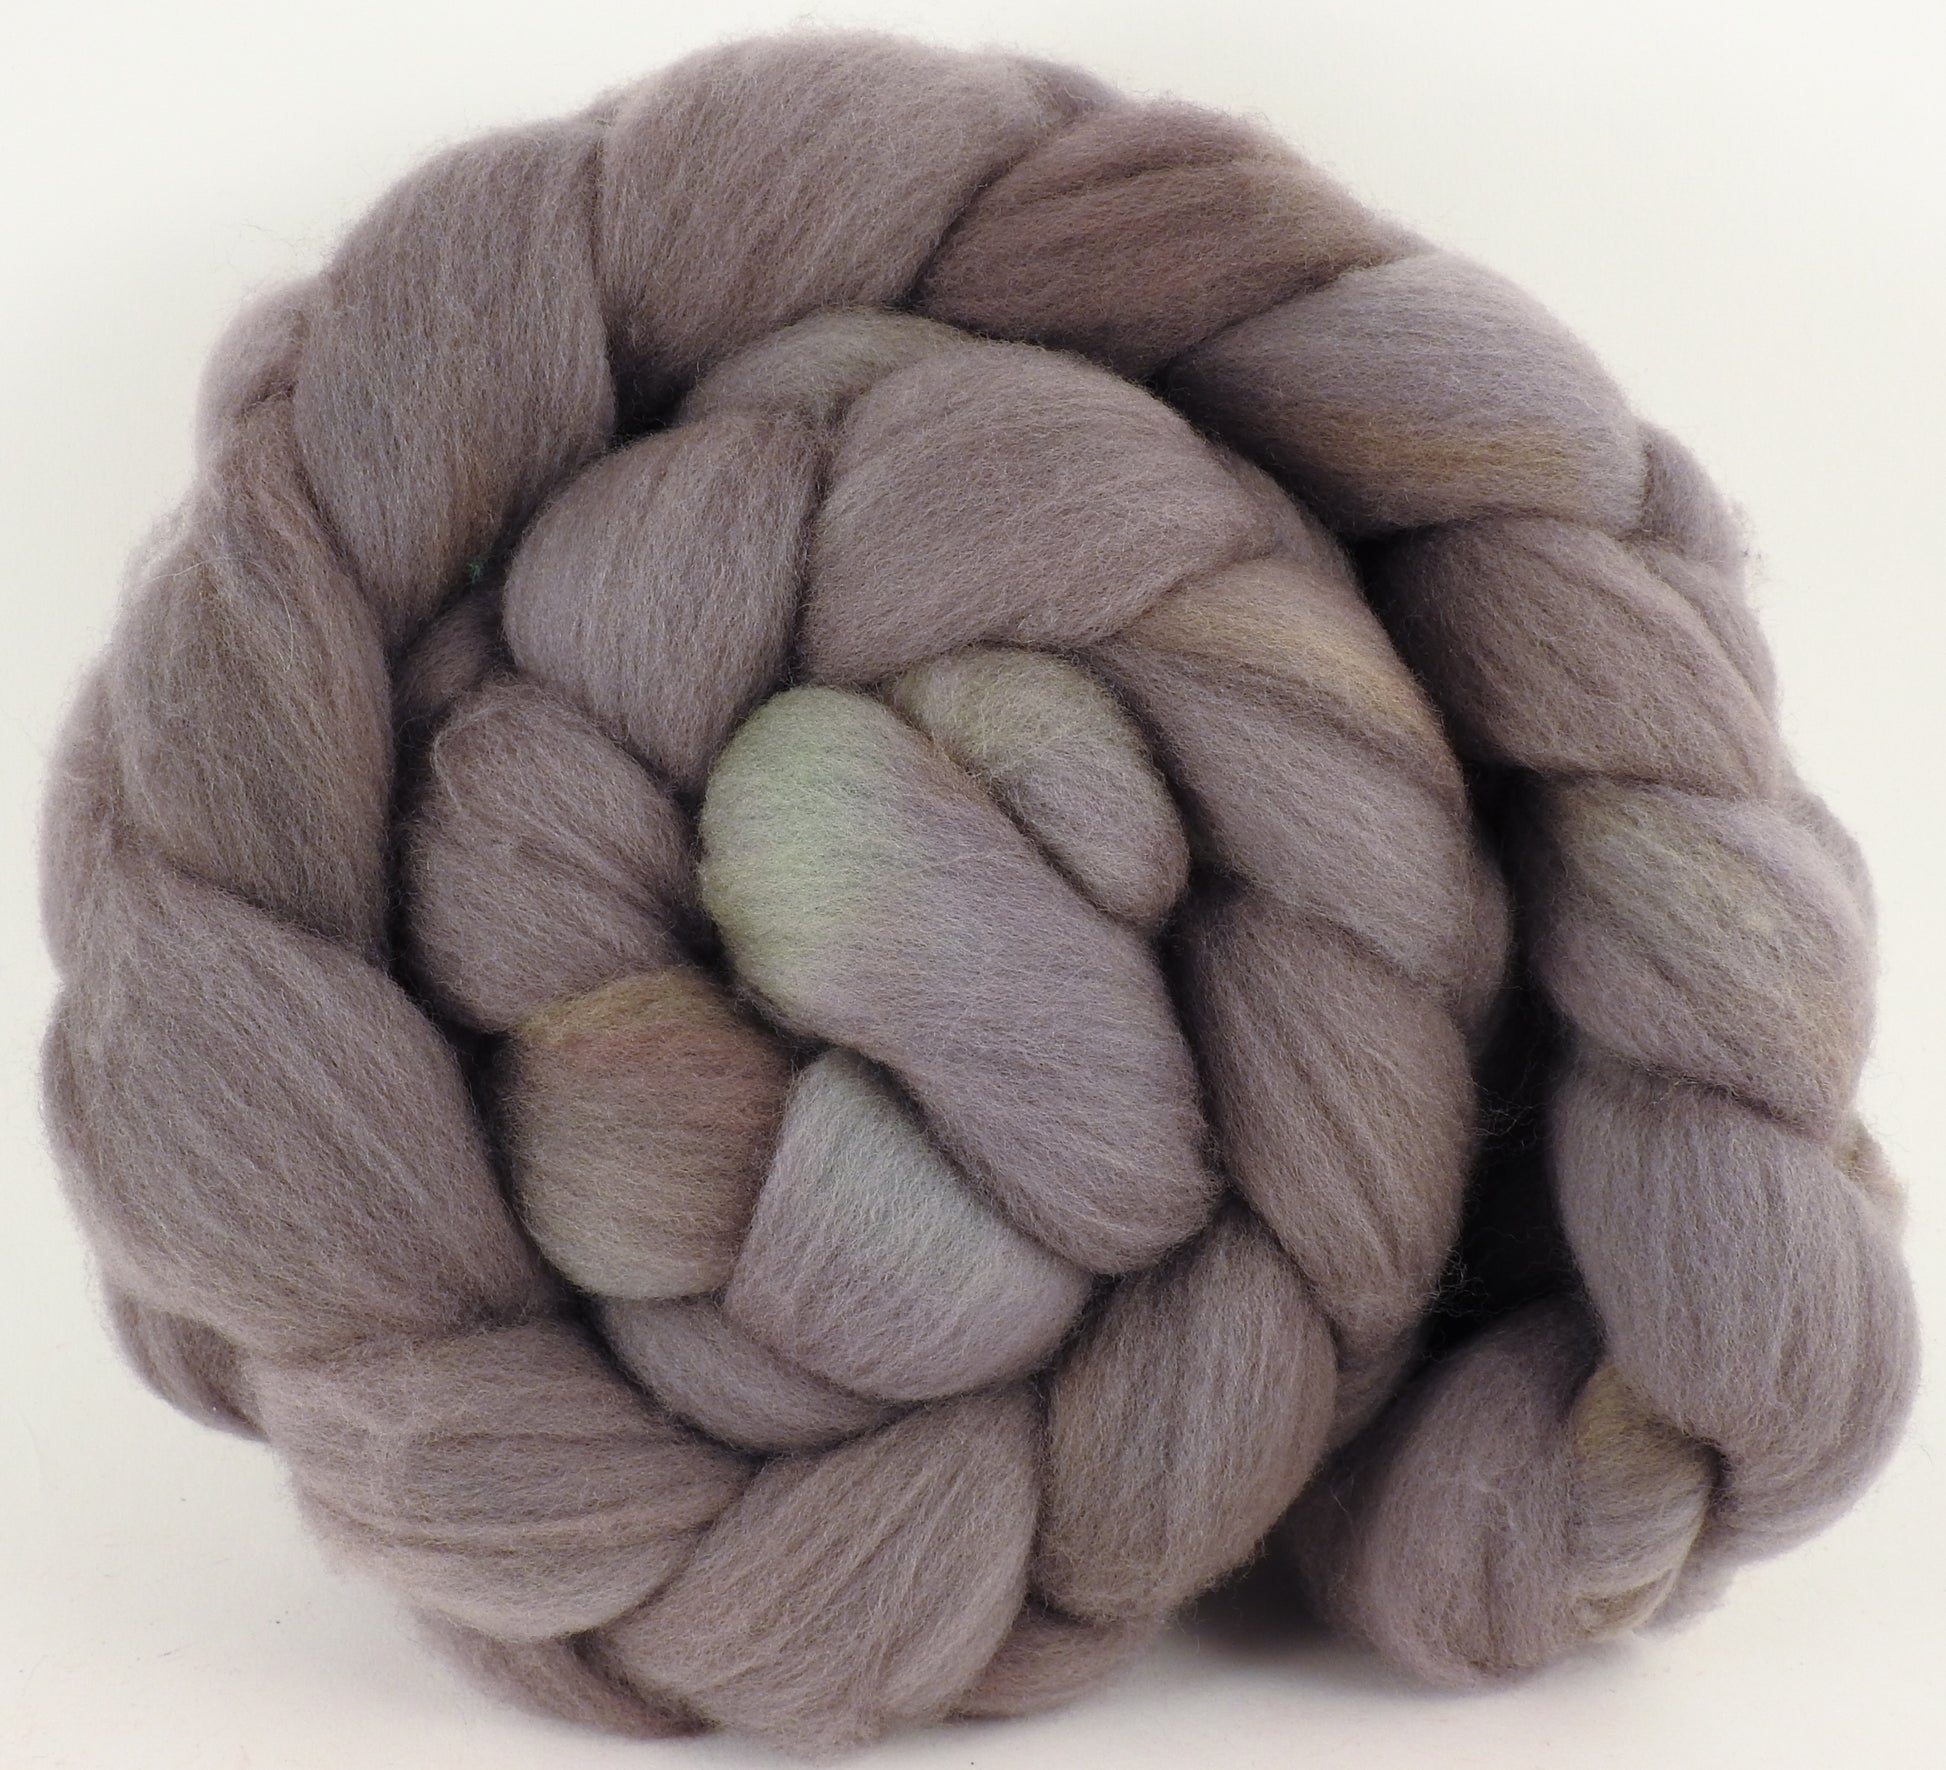 Hand dyed top for spinning -Dove- (5.4 oz.) Organic Polwarth - Inglenook Fibers